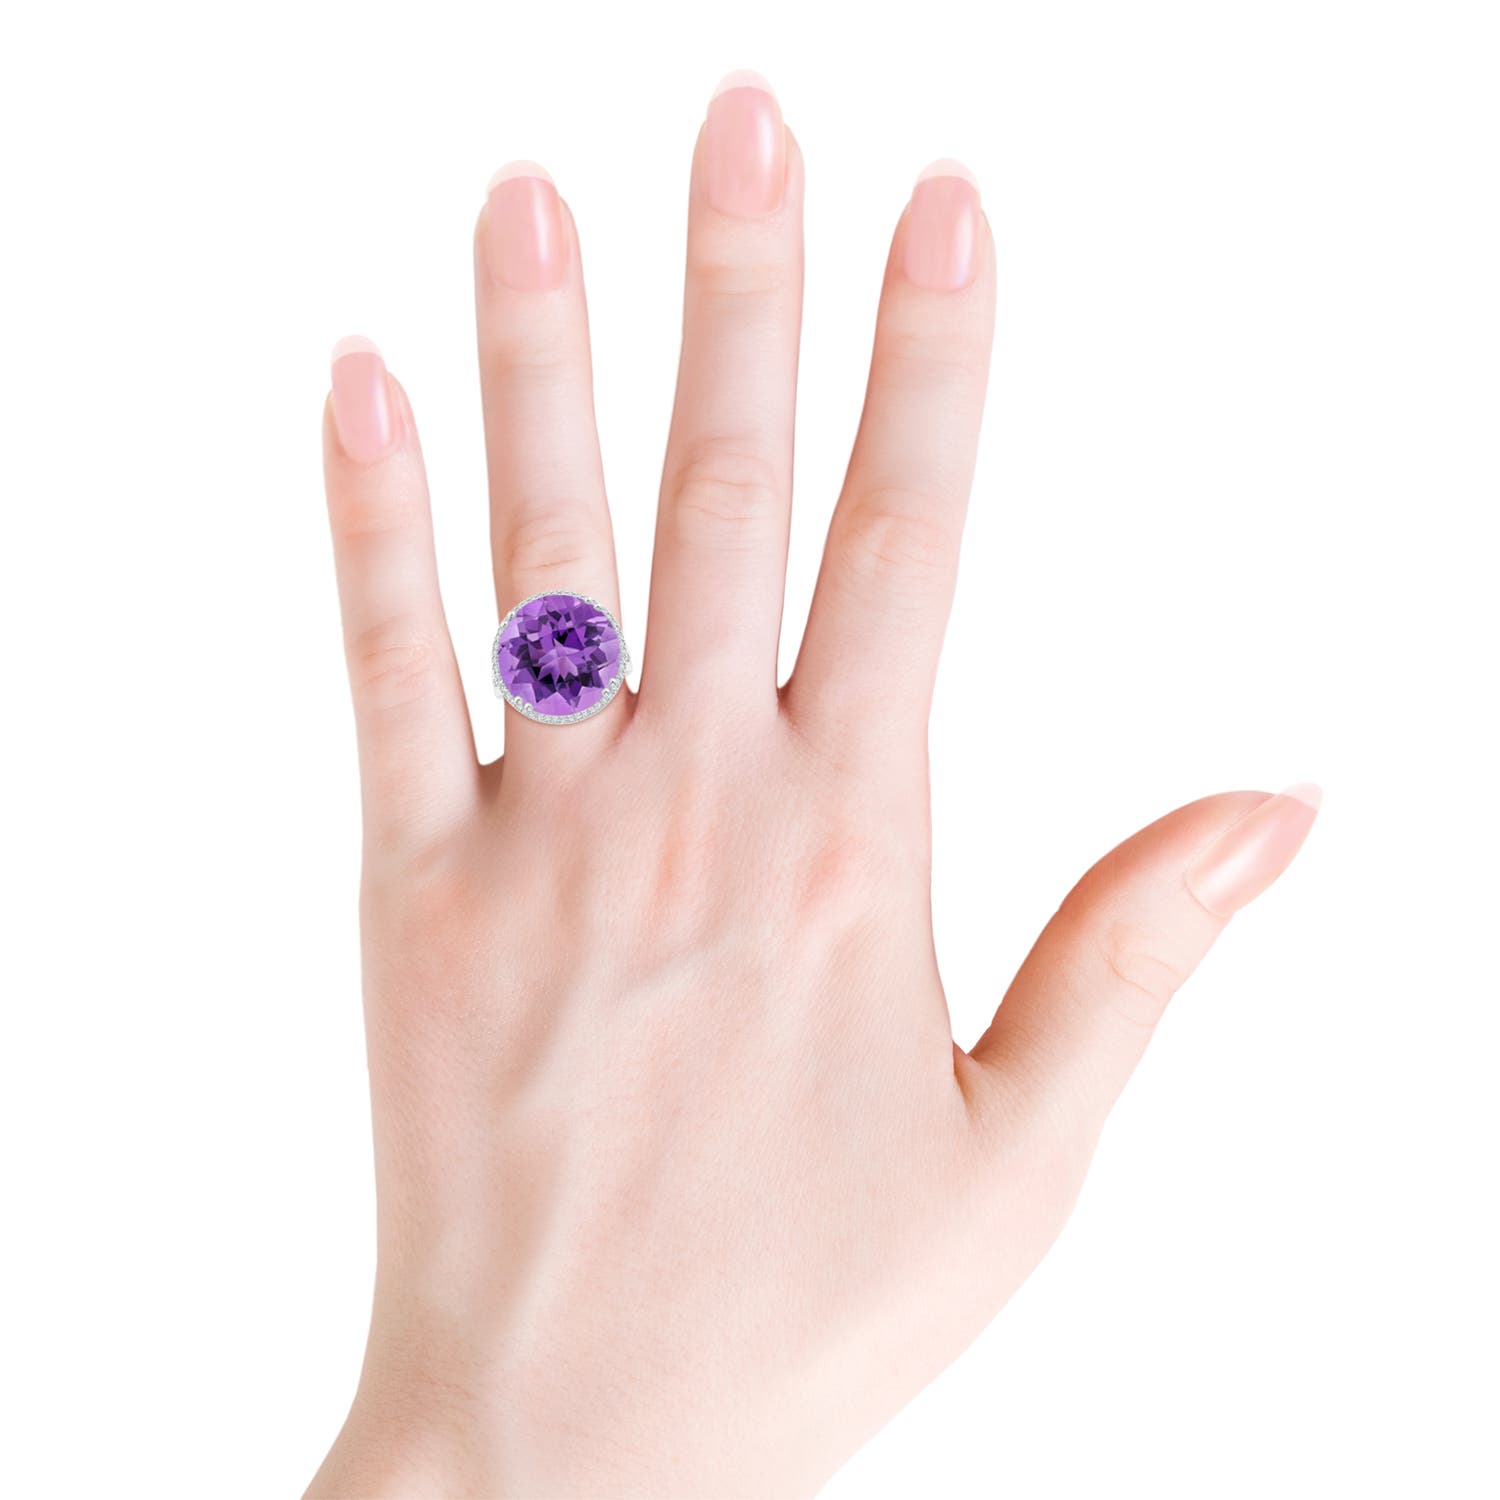 AA - Amethyst / 15.18 CT / 14 KT White Gold